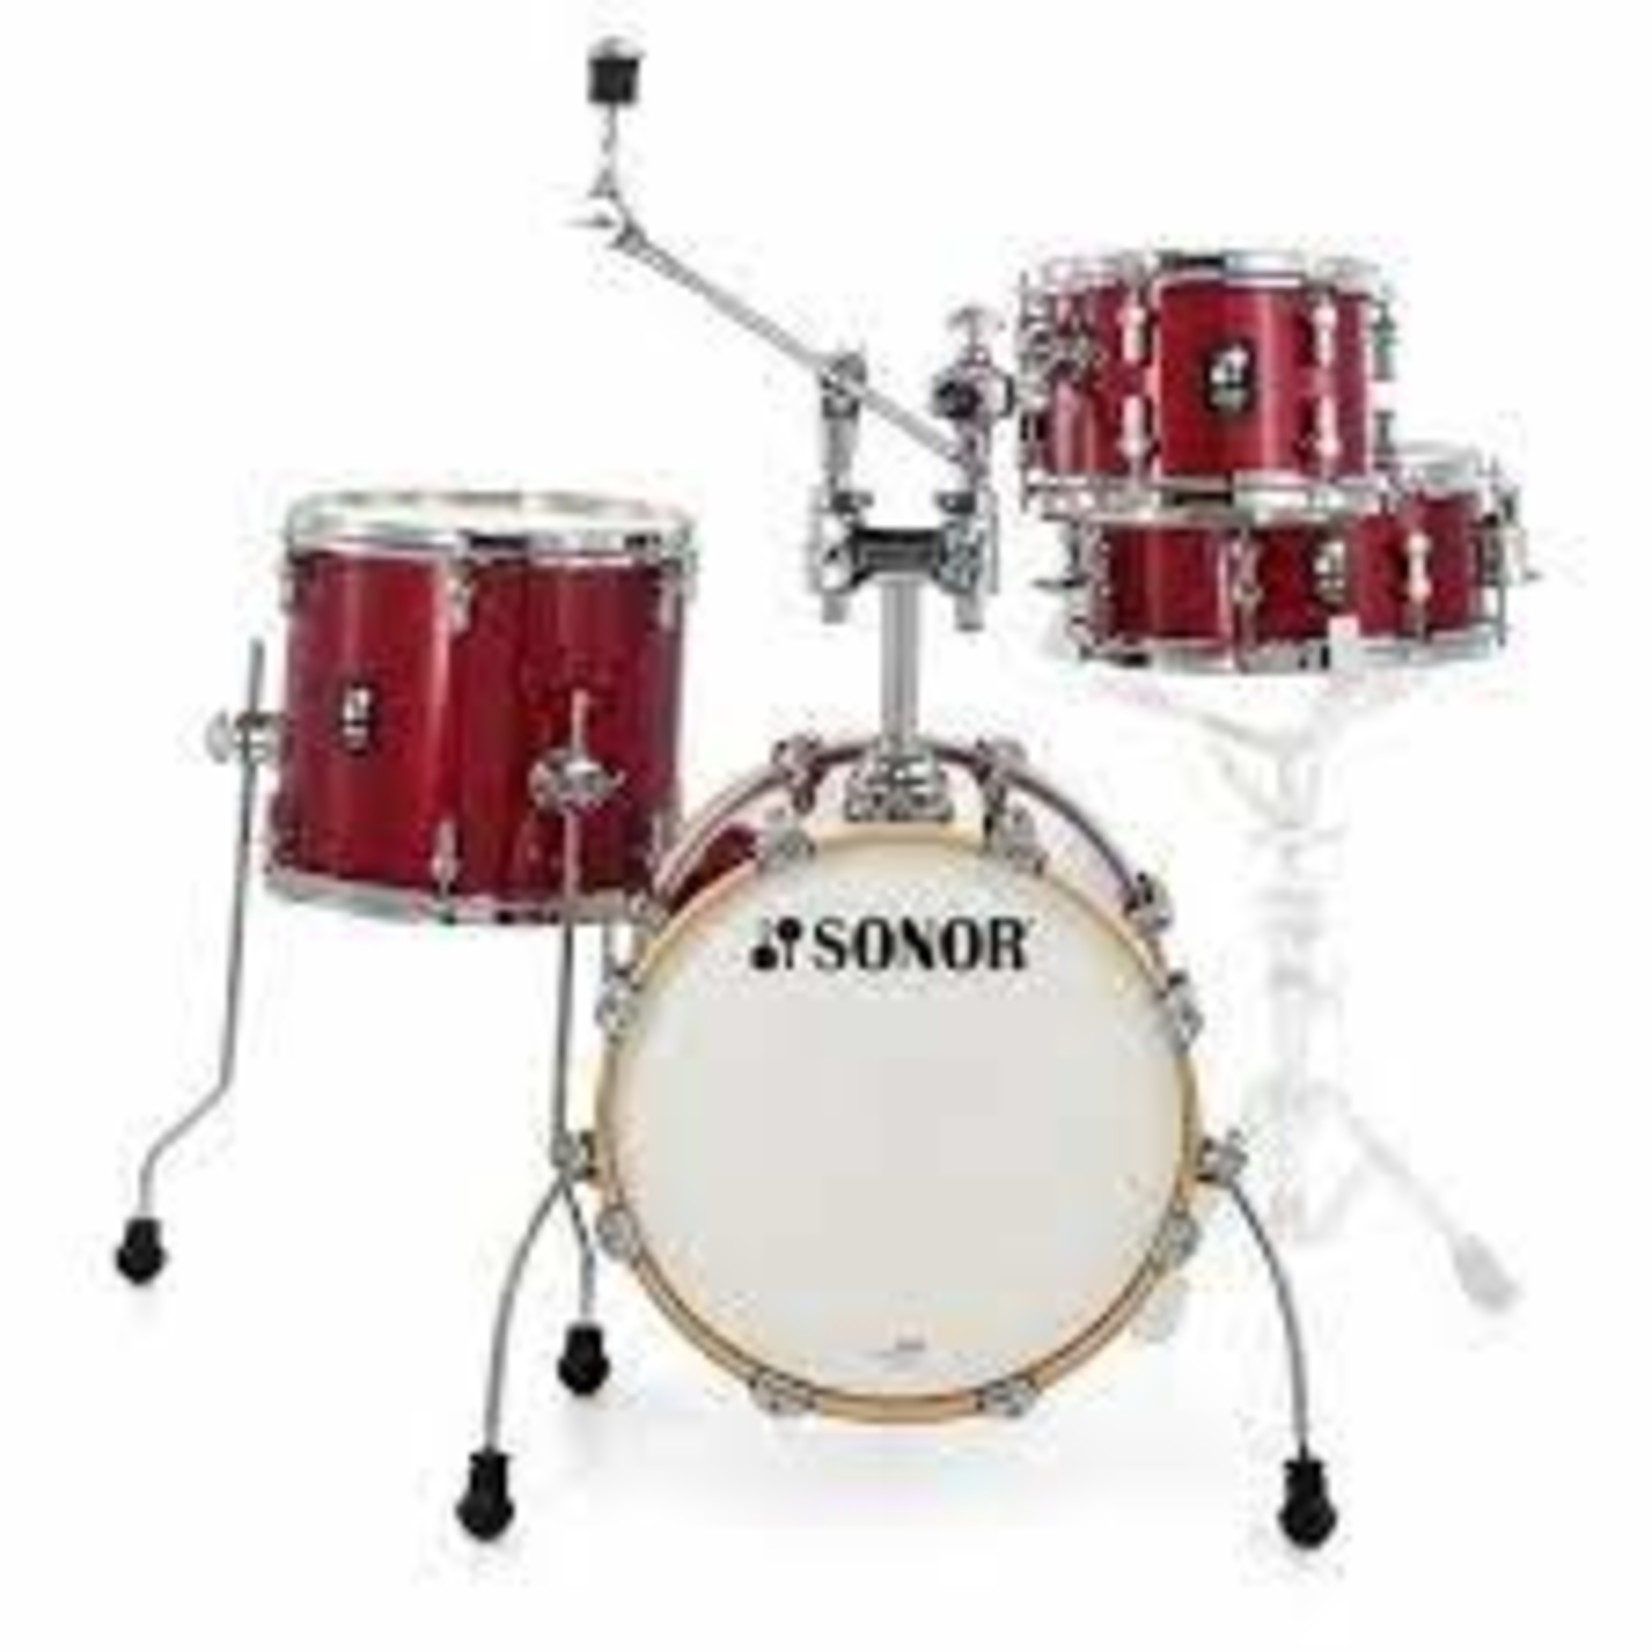 Sonor Sonor AQX Jungle Kit - “Red Moon Sparkle”